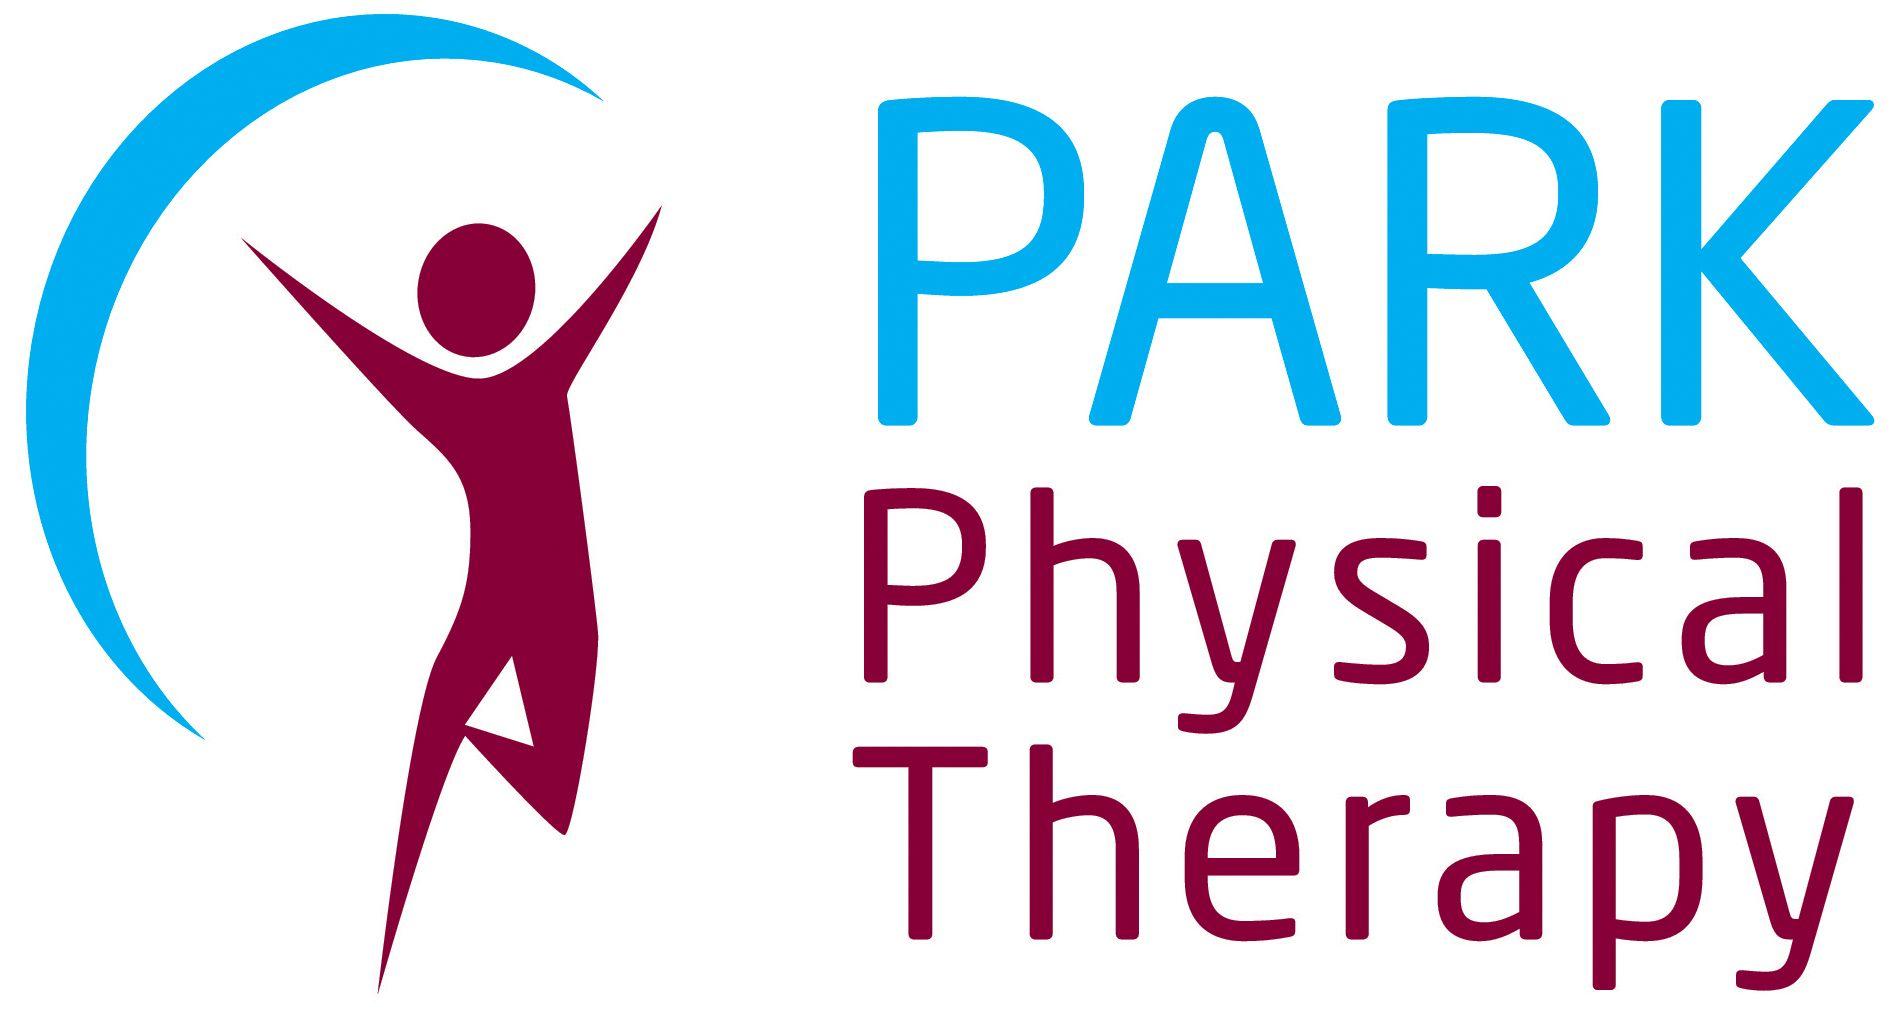 Physical Logo - Physical therapy Logos